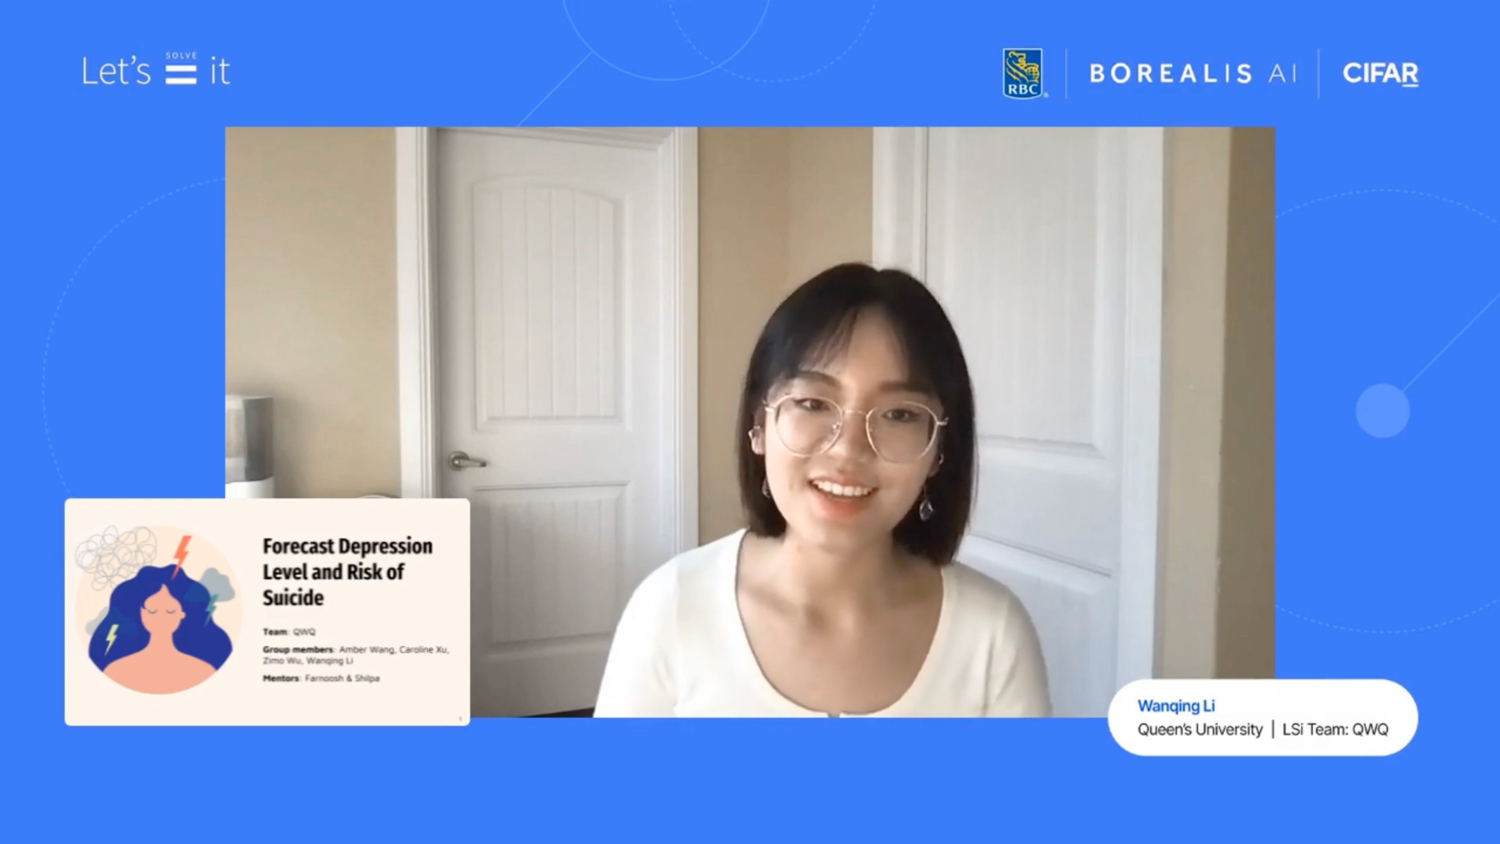 Talking with Wanqing Li about advancing diversity and inclusion in AI